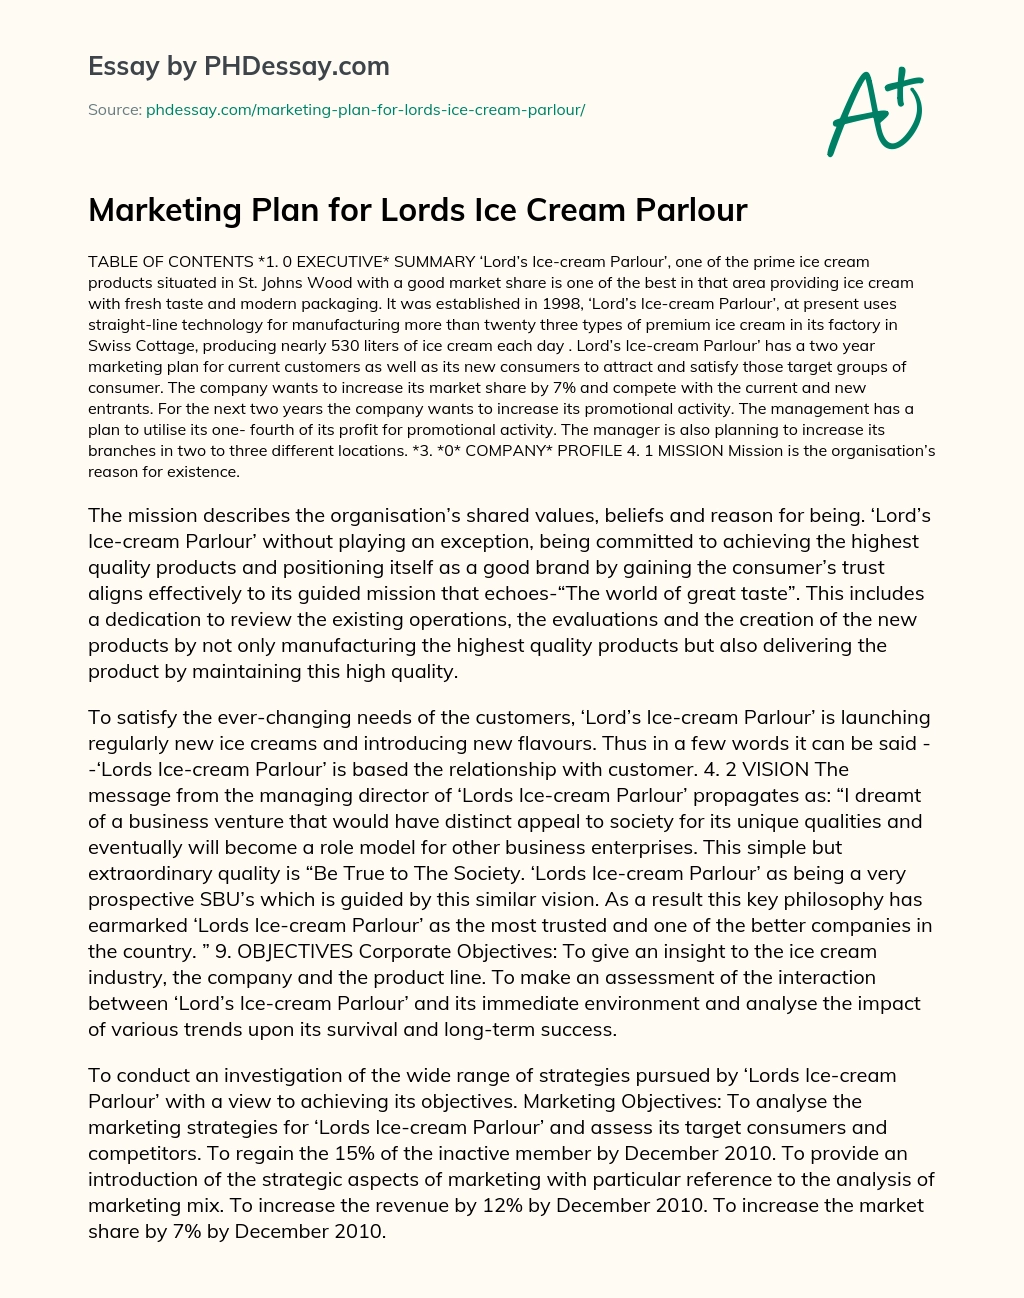 Marketing Plan for Lords Ice Cream Parlour essay